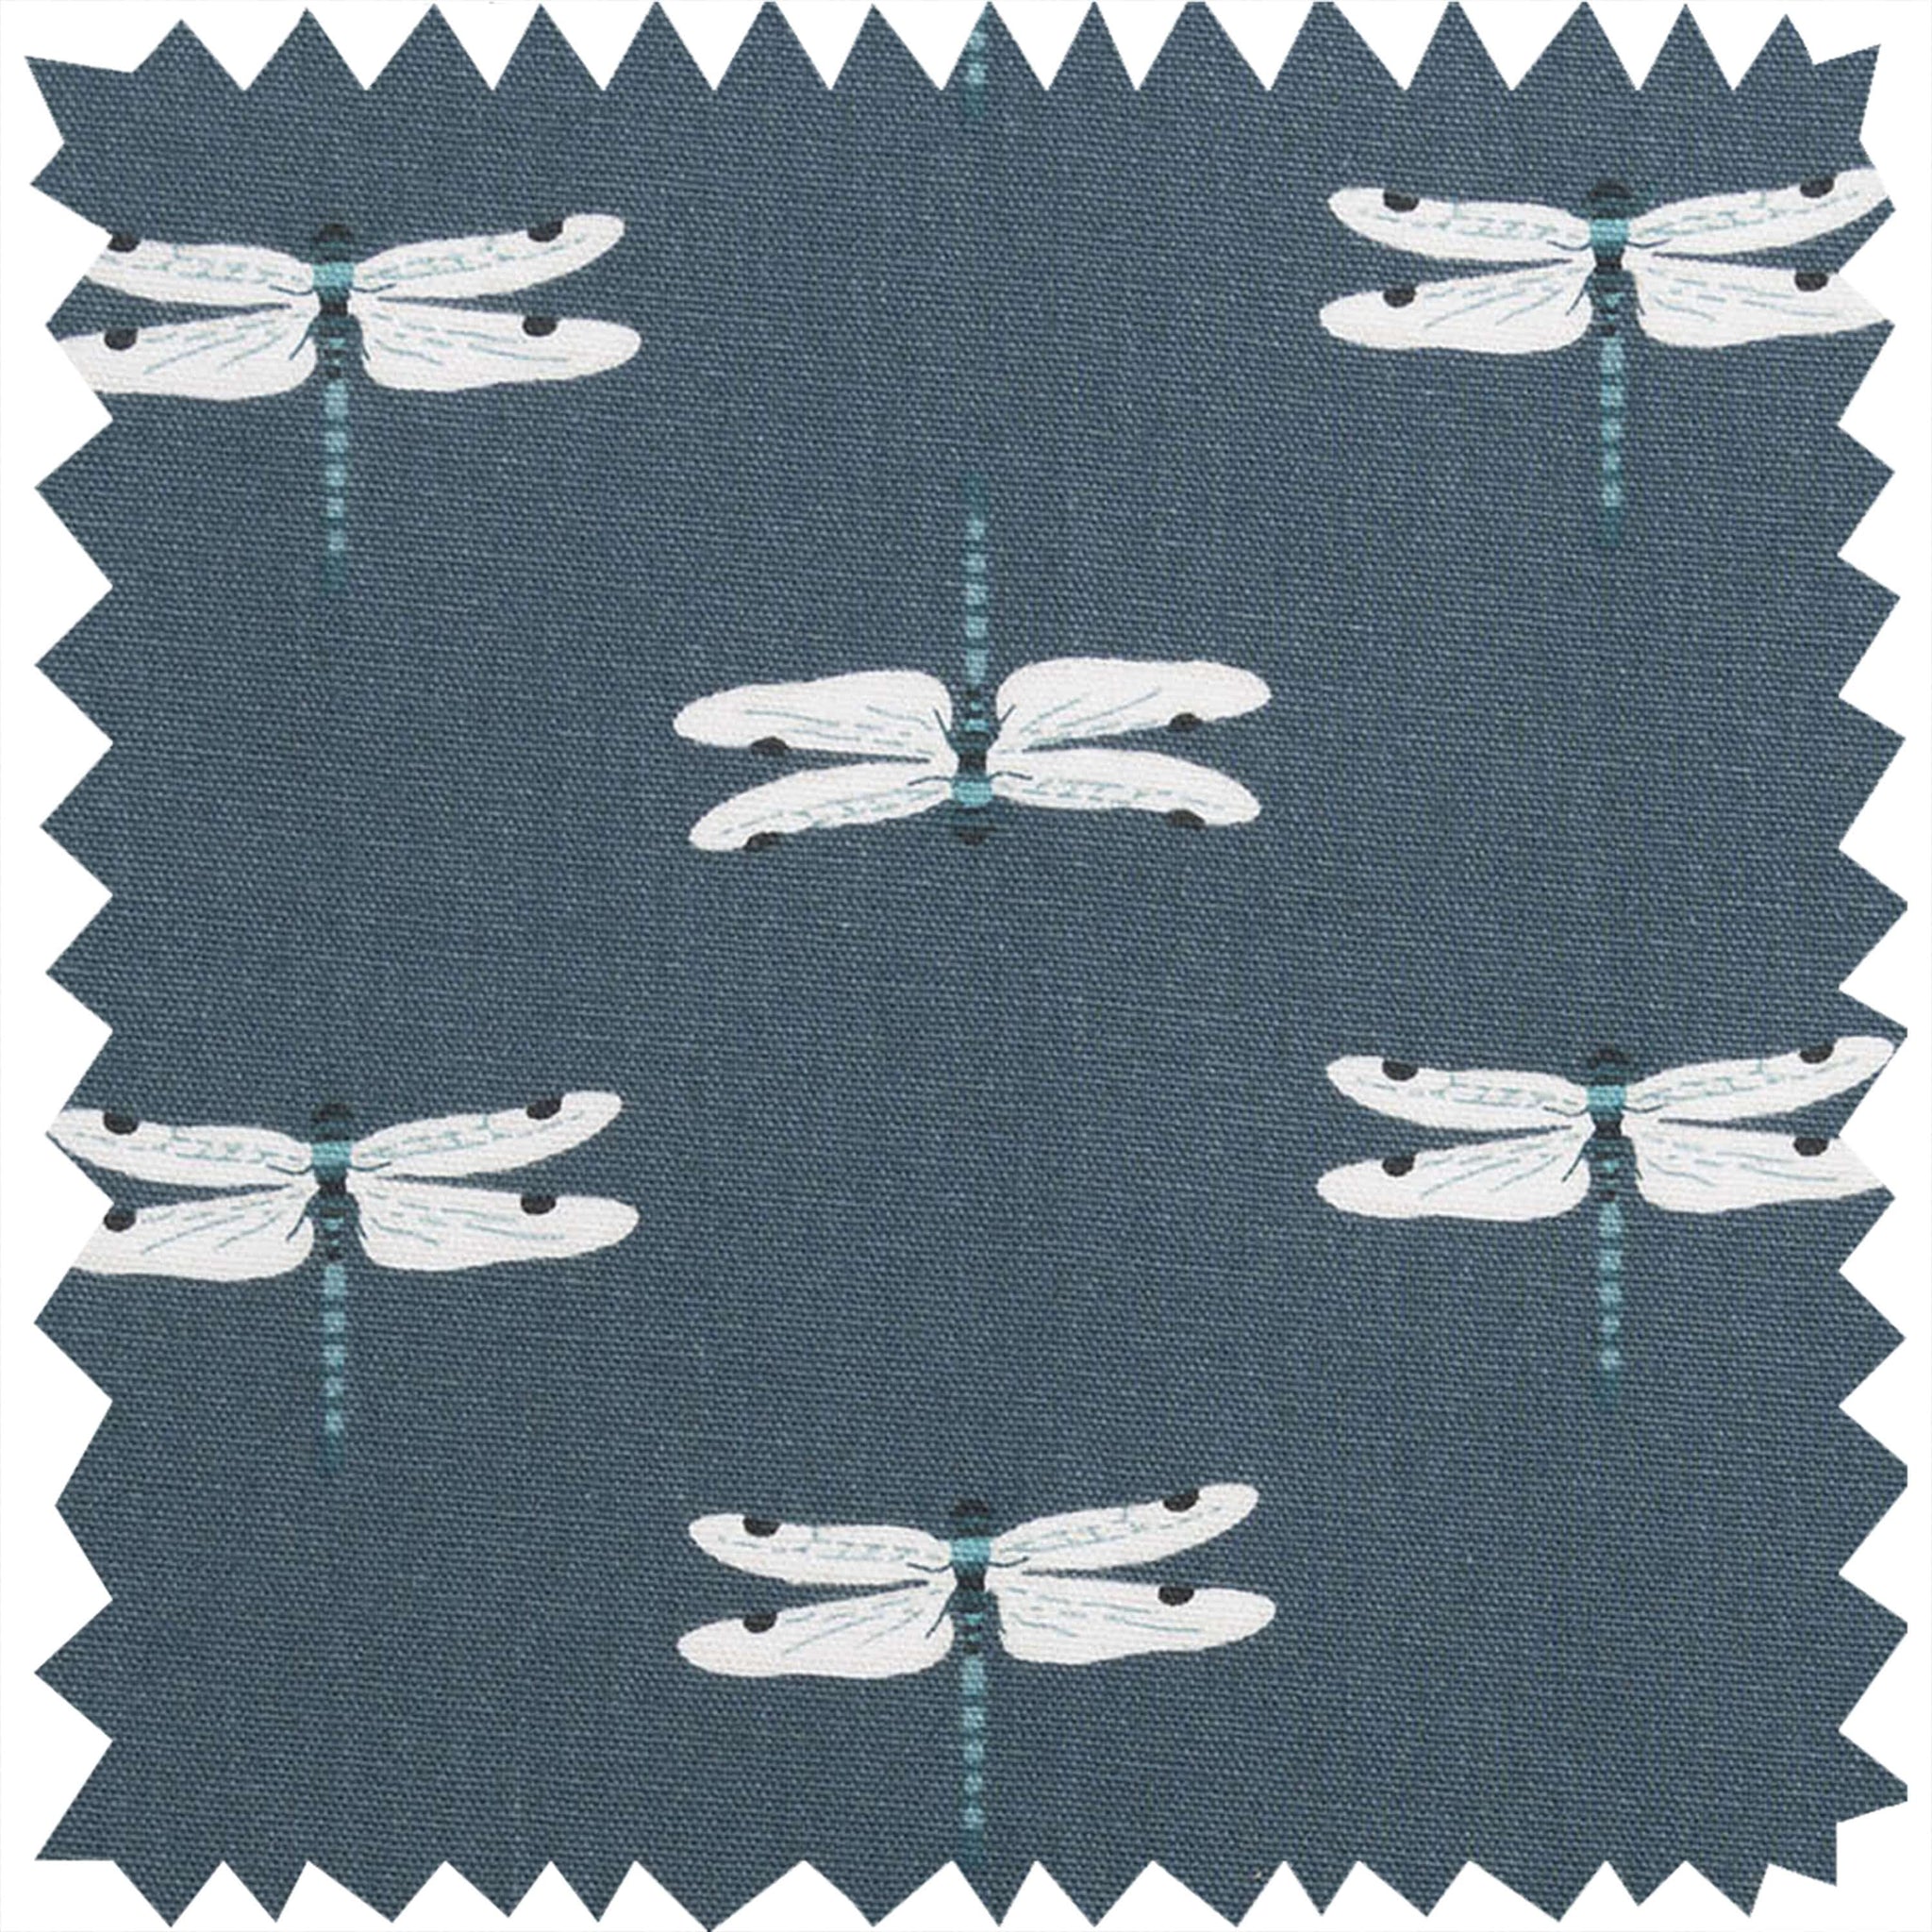 Dragonfly Fabric Placemat